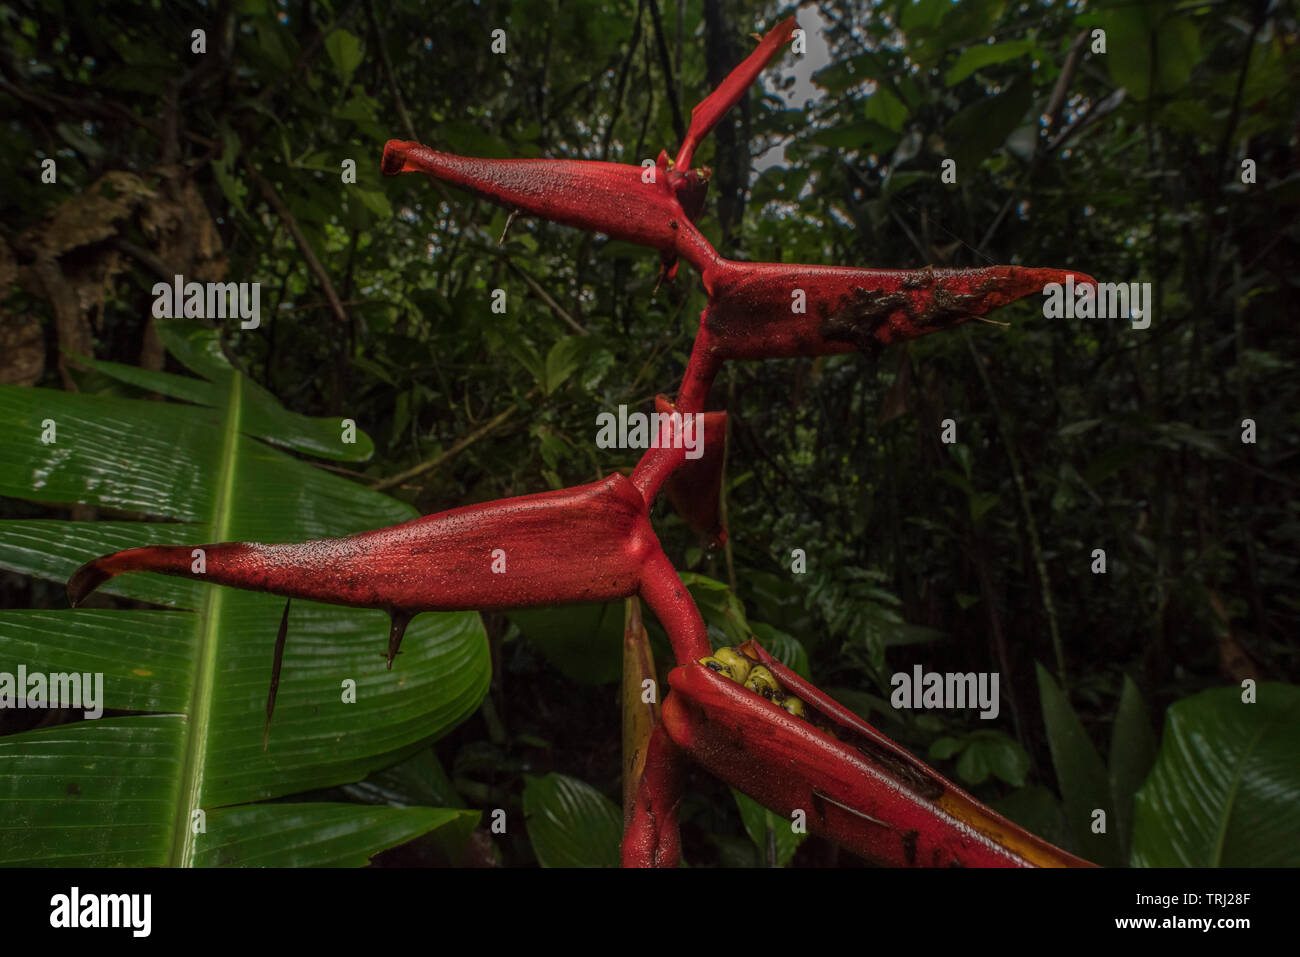 Heliconia flowering in the Ecuadorian Amazon rainforest, specifically in the jungle at Yasuni national park. Stock Photo